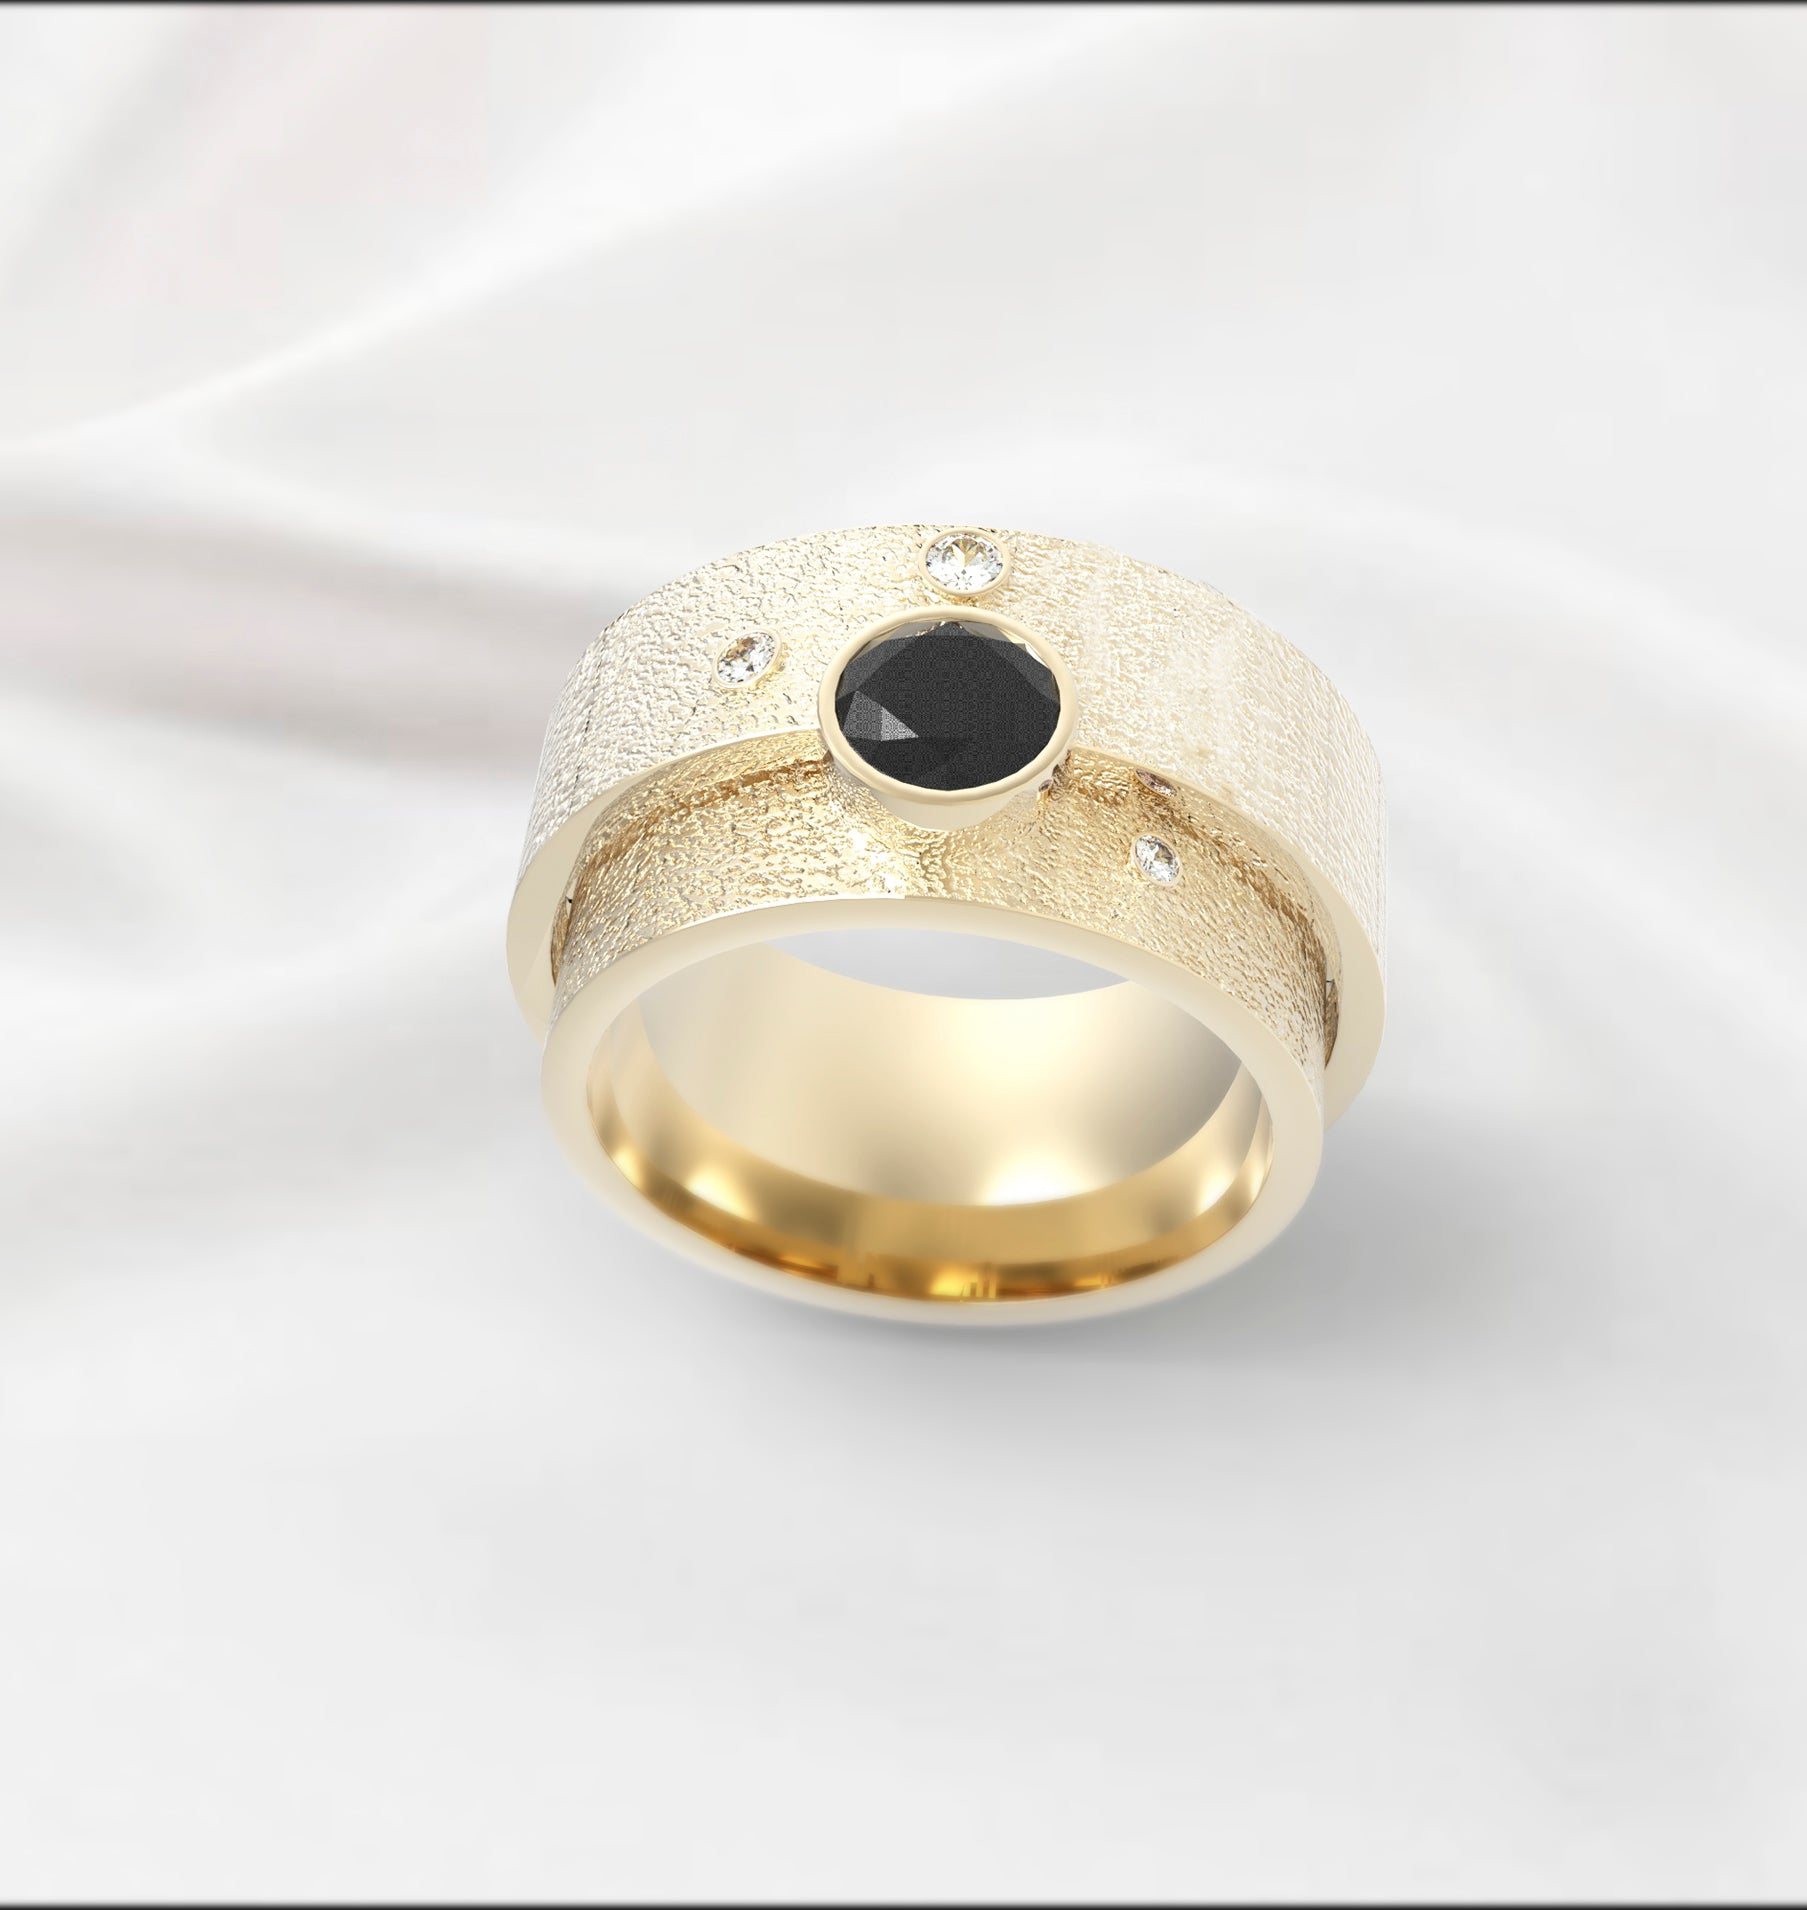 Bold Unisex Wedding/Engagement Ring for Both Men and Women No.61